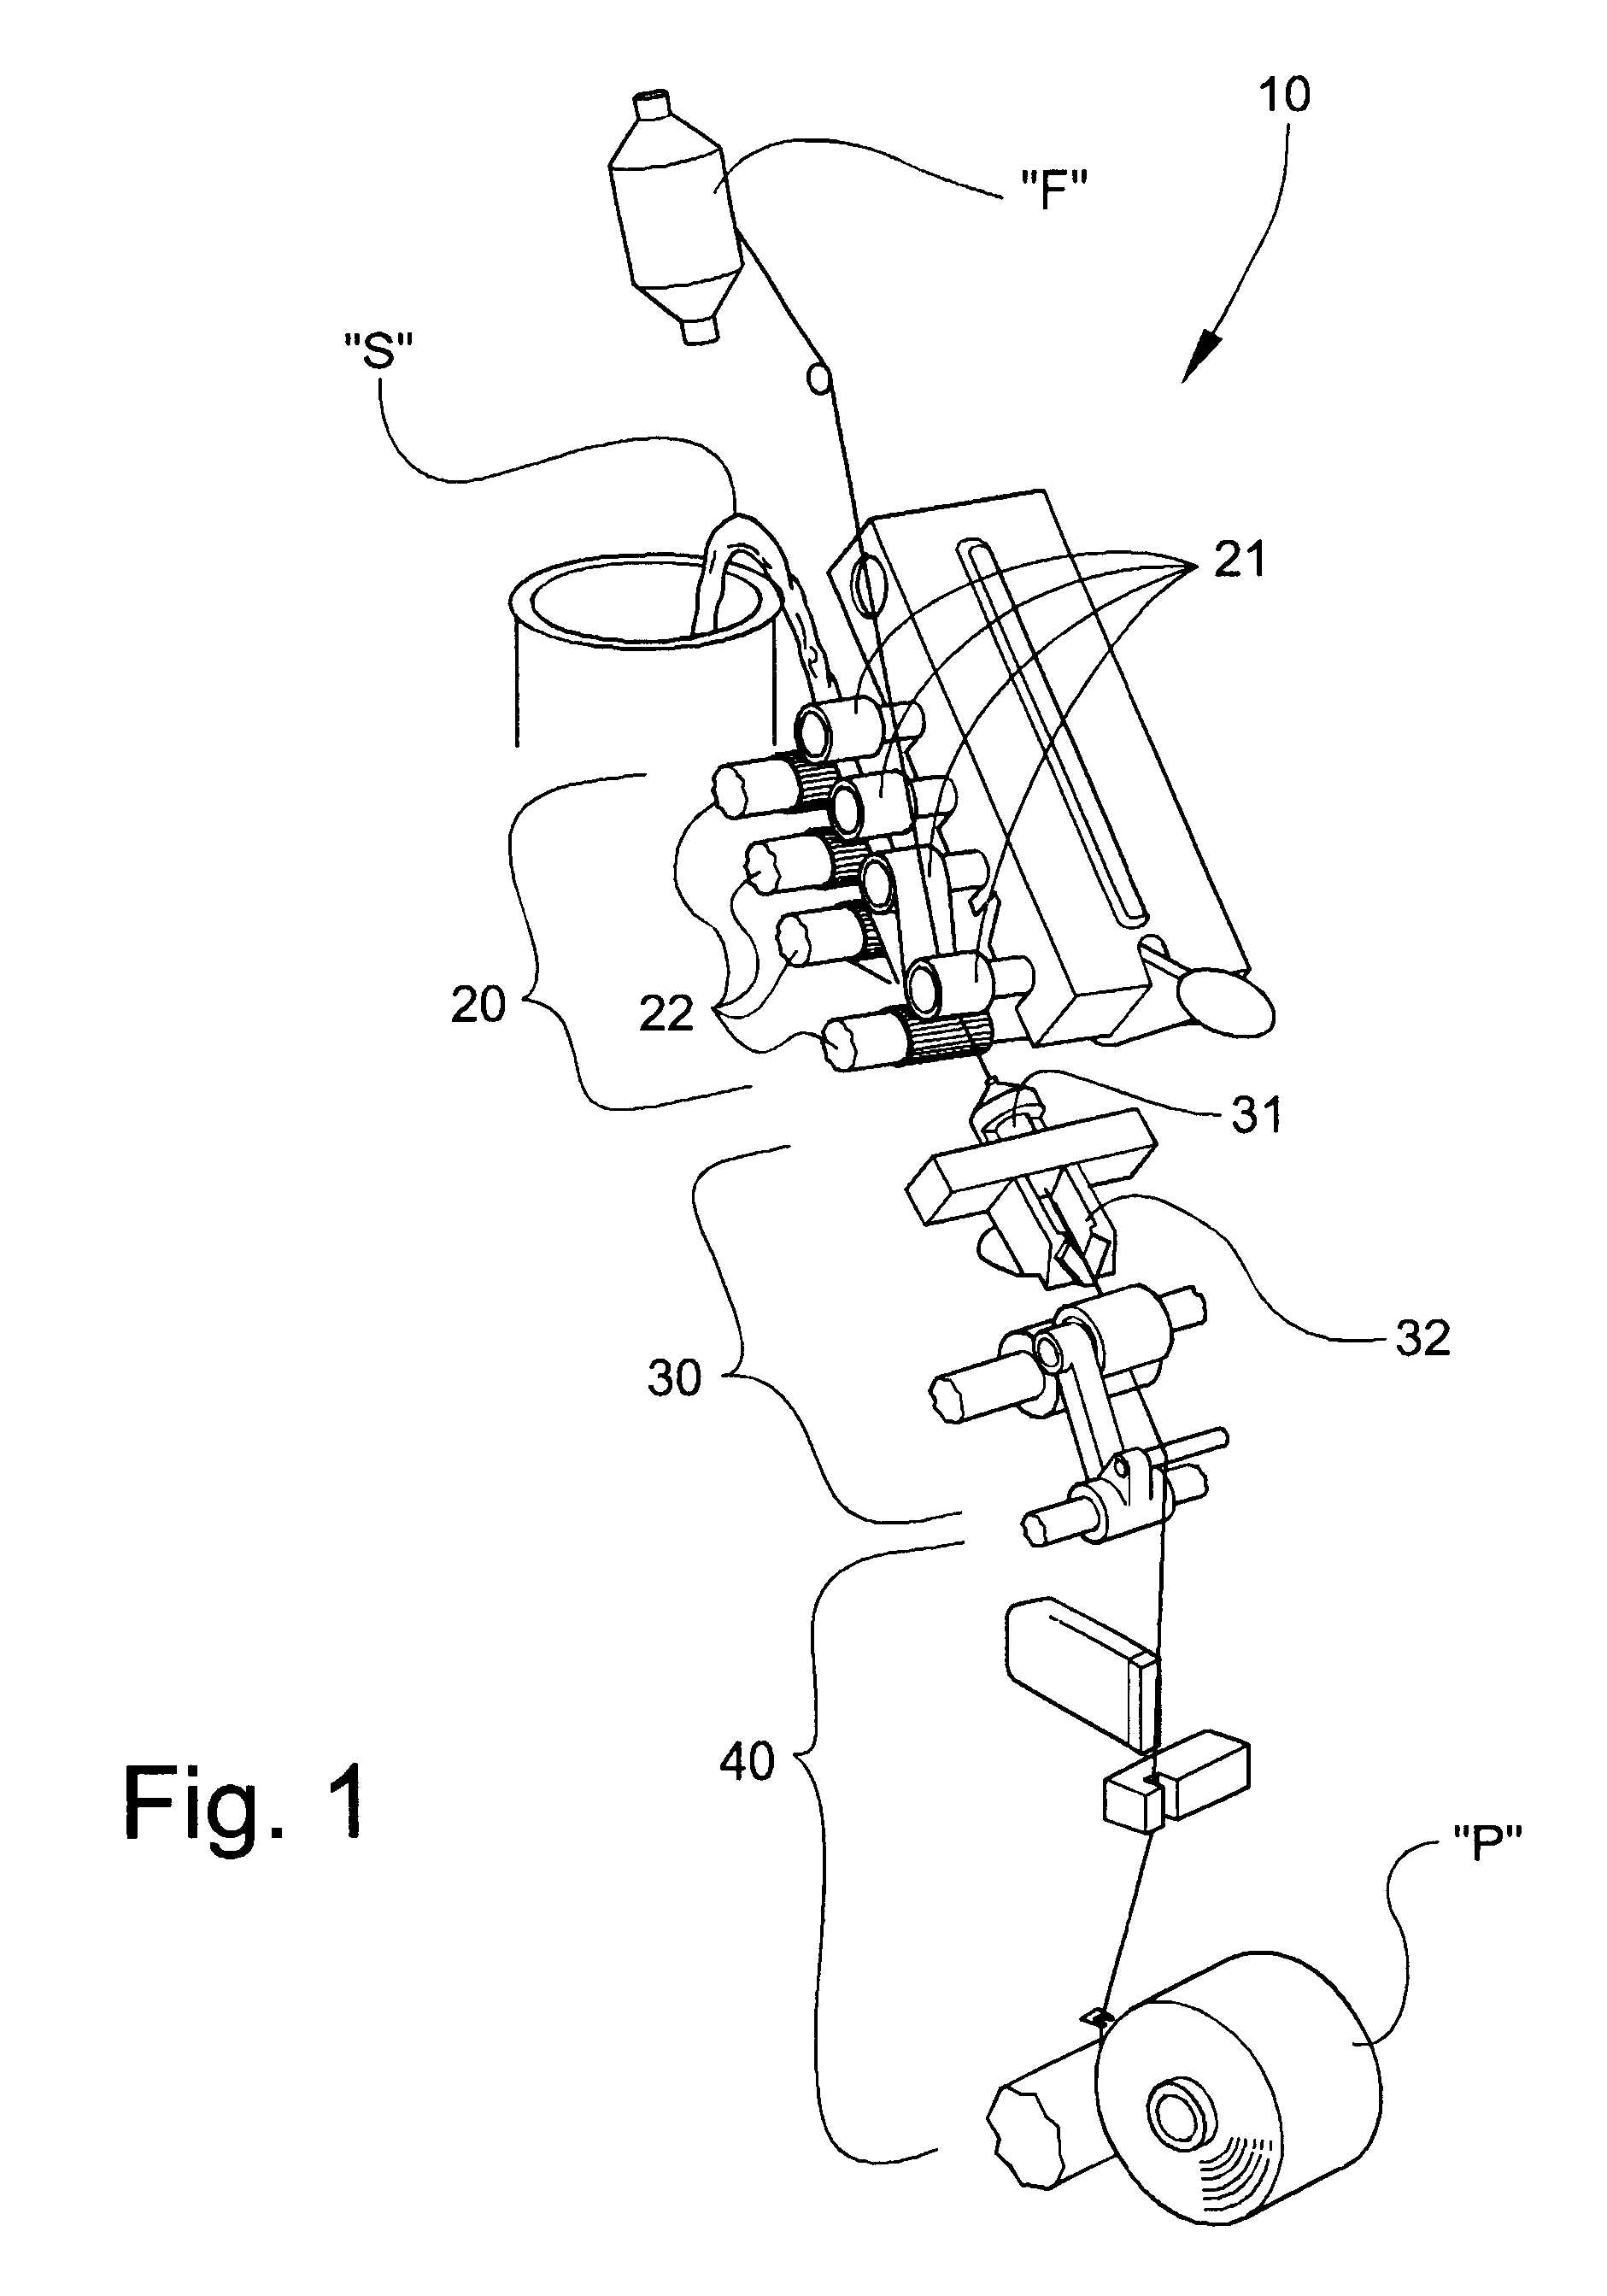 Composite, break-resistant sewing thread and method